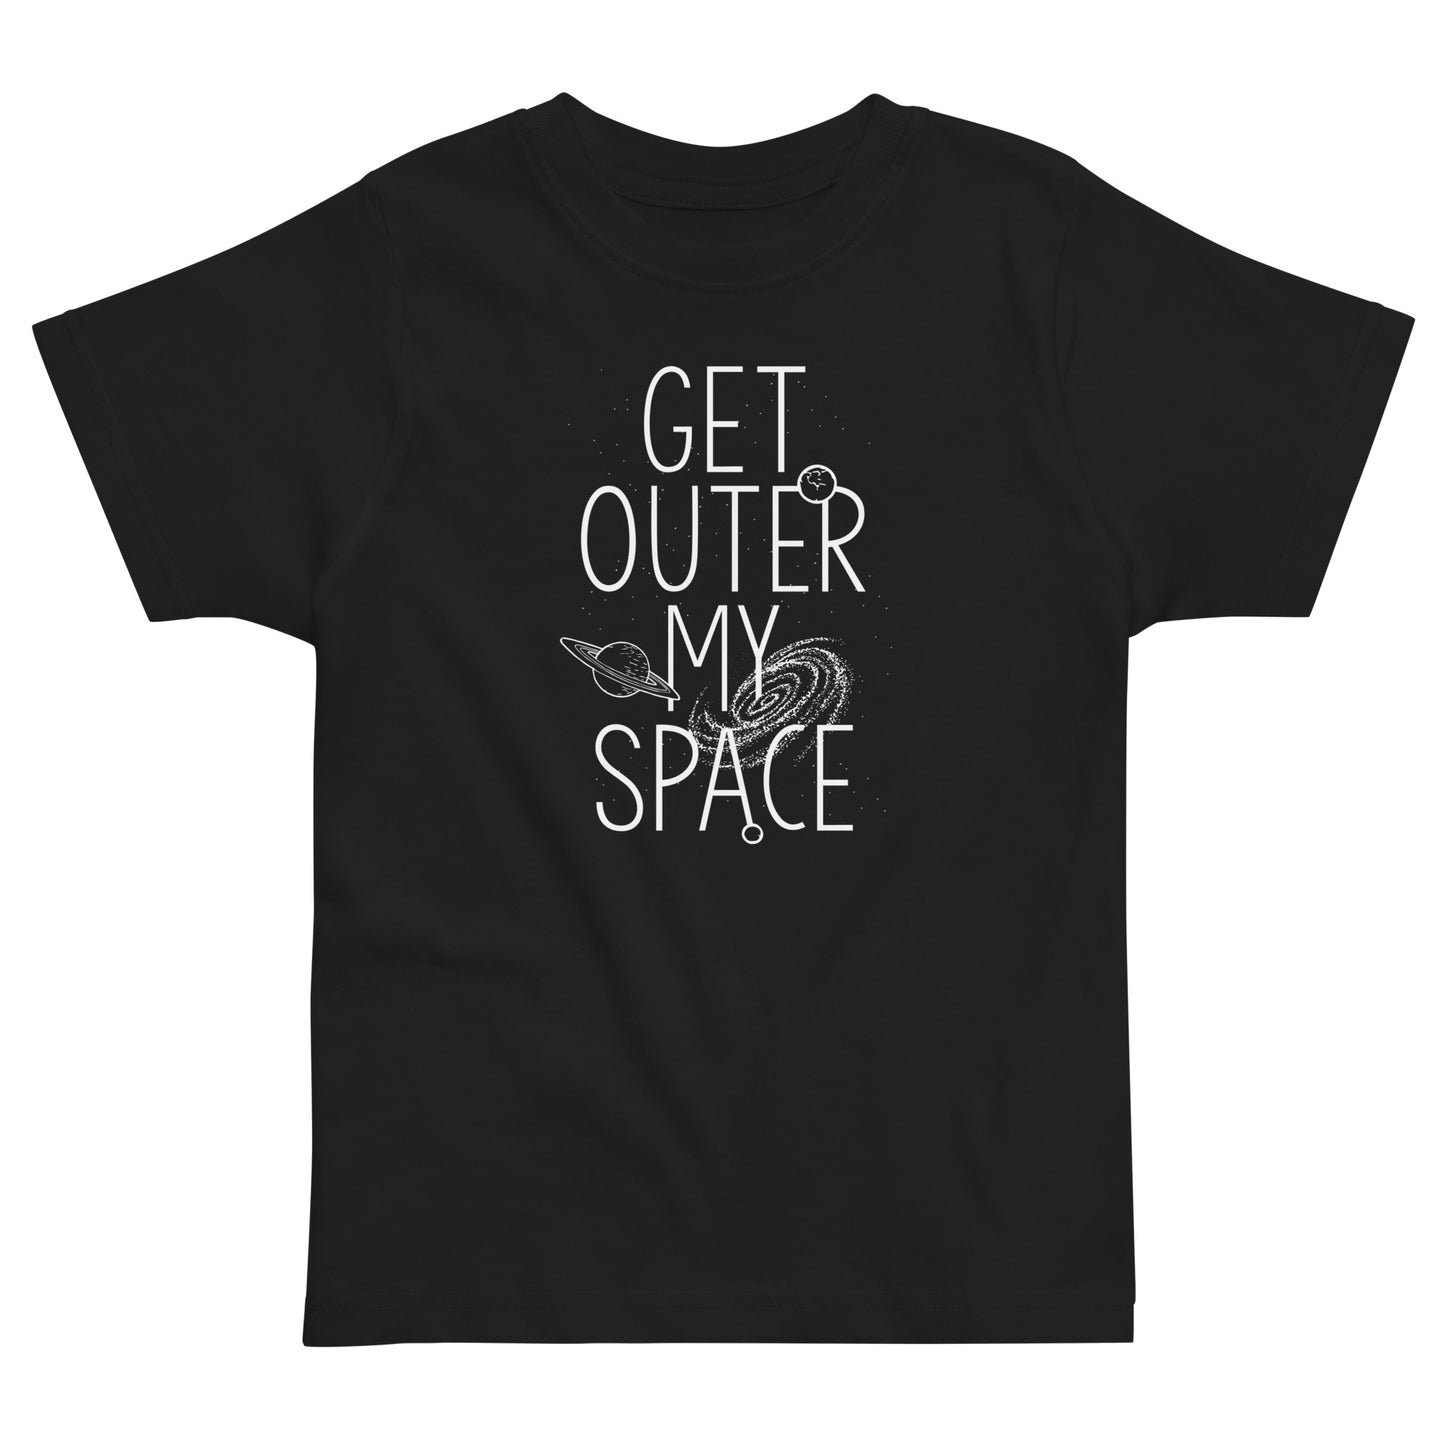 Get Outer My Space Kid's Toddler Tee